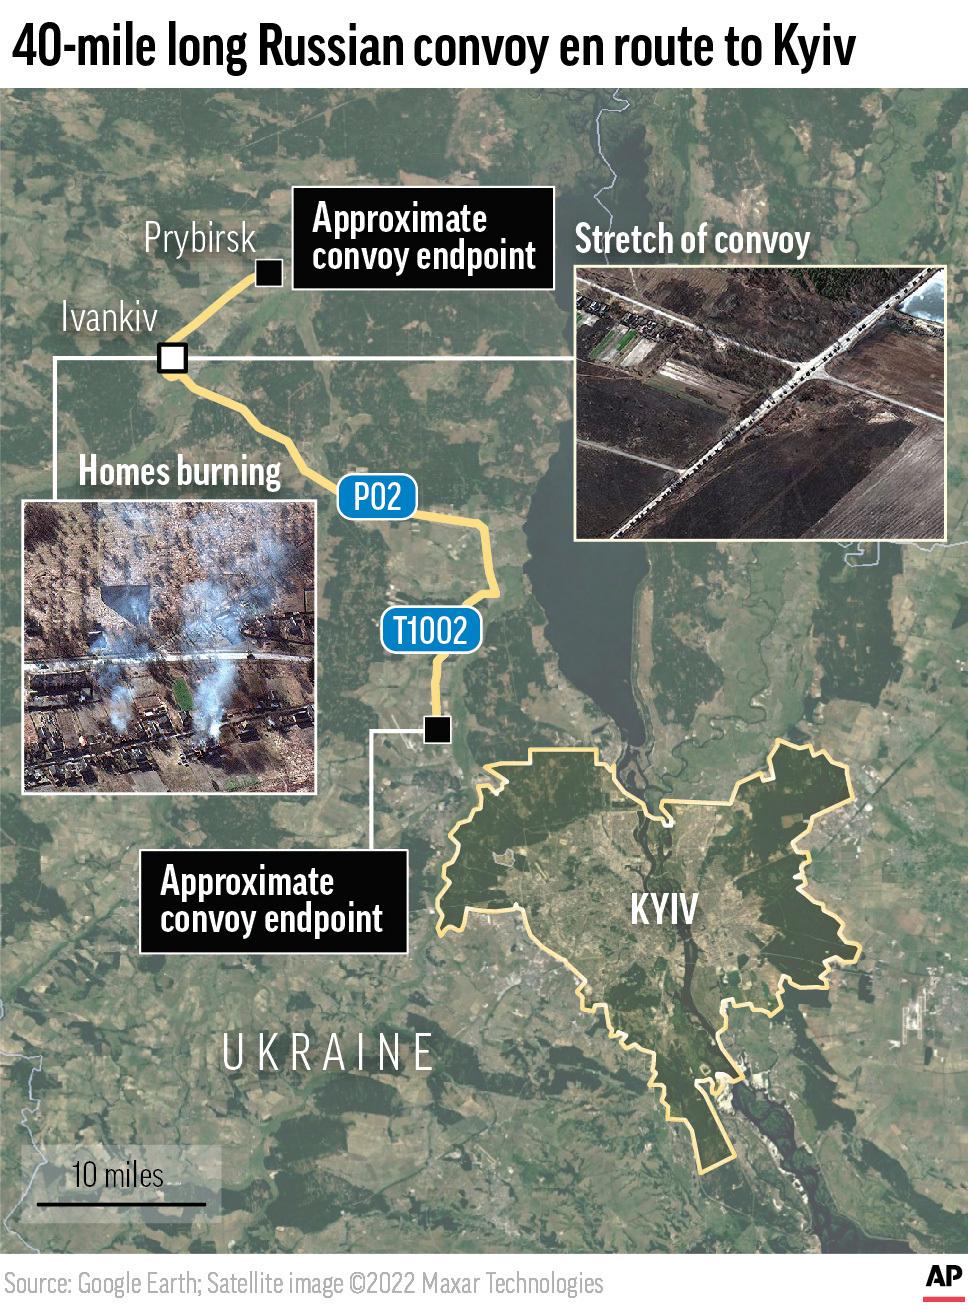 A map using satellite imagery and data from Google Earth showing the approximate start and end points of a 40-mile long Russian military convoy en route to Kyiv, Ukraine on March 1, 2022. 